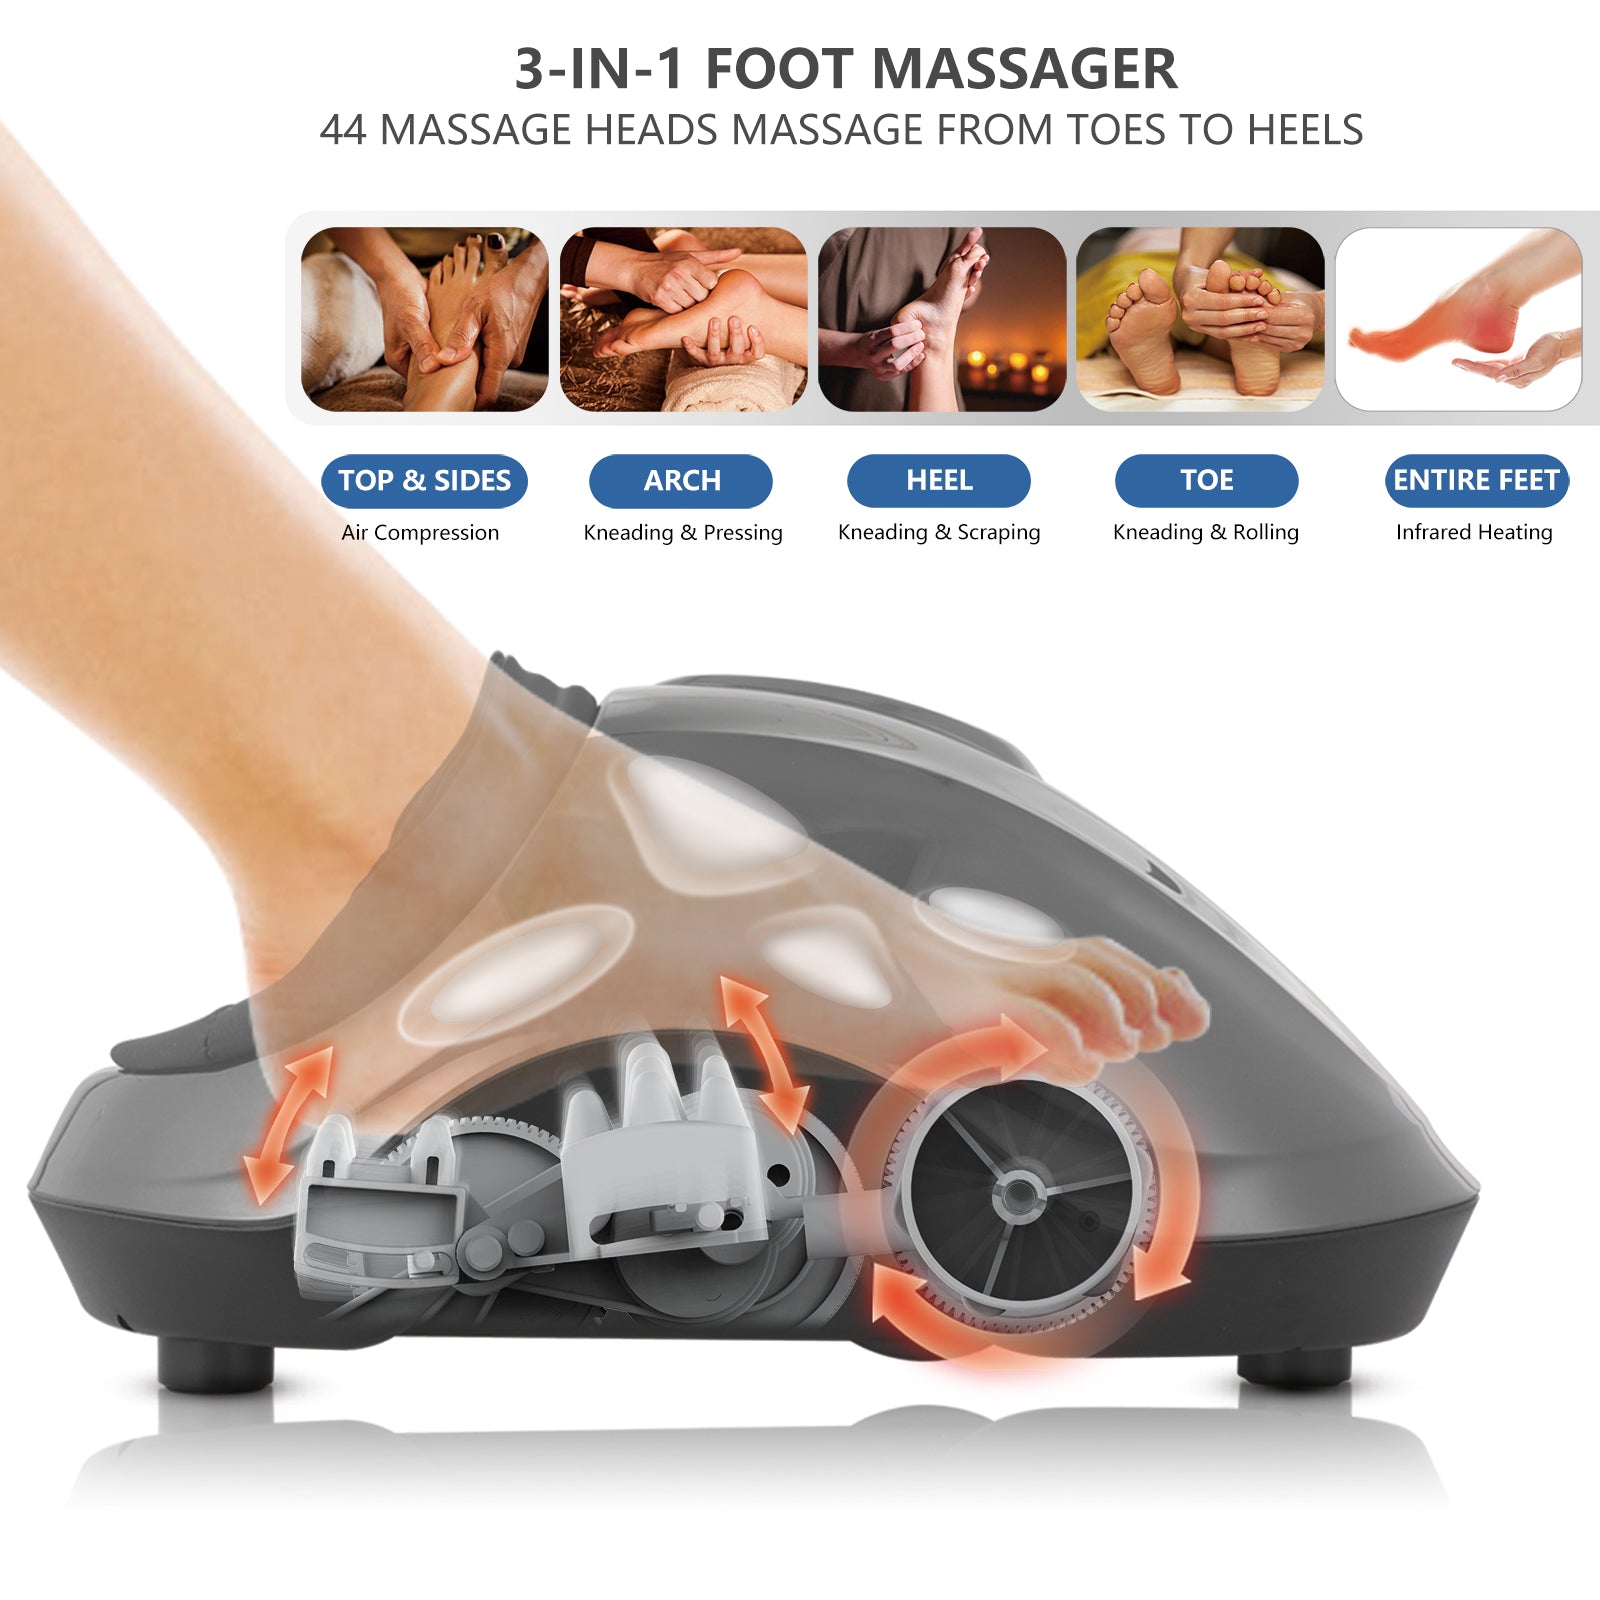 FIT KING Neck Massager with Heat,Fatigue and Pain Relief,TENS Intelligent Neck  Massager Cordless and Rechargeable Design with Remote Control and Voice  Broadcast,5 Modes 16 Intensities FT-056N